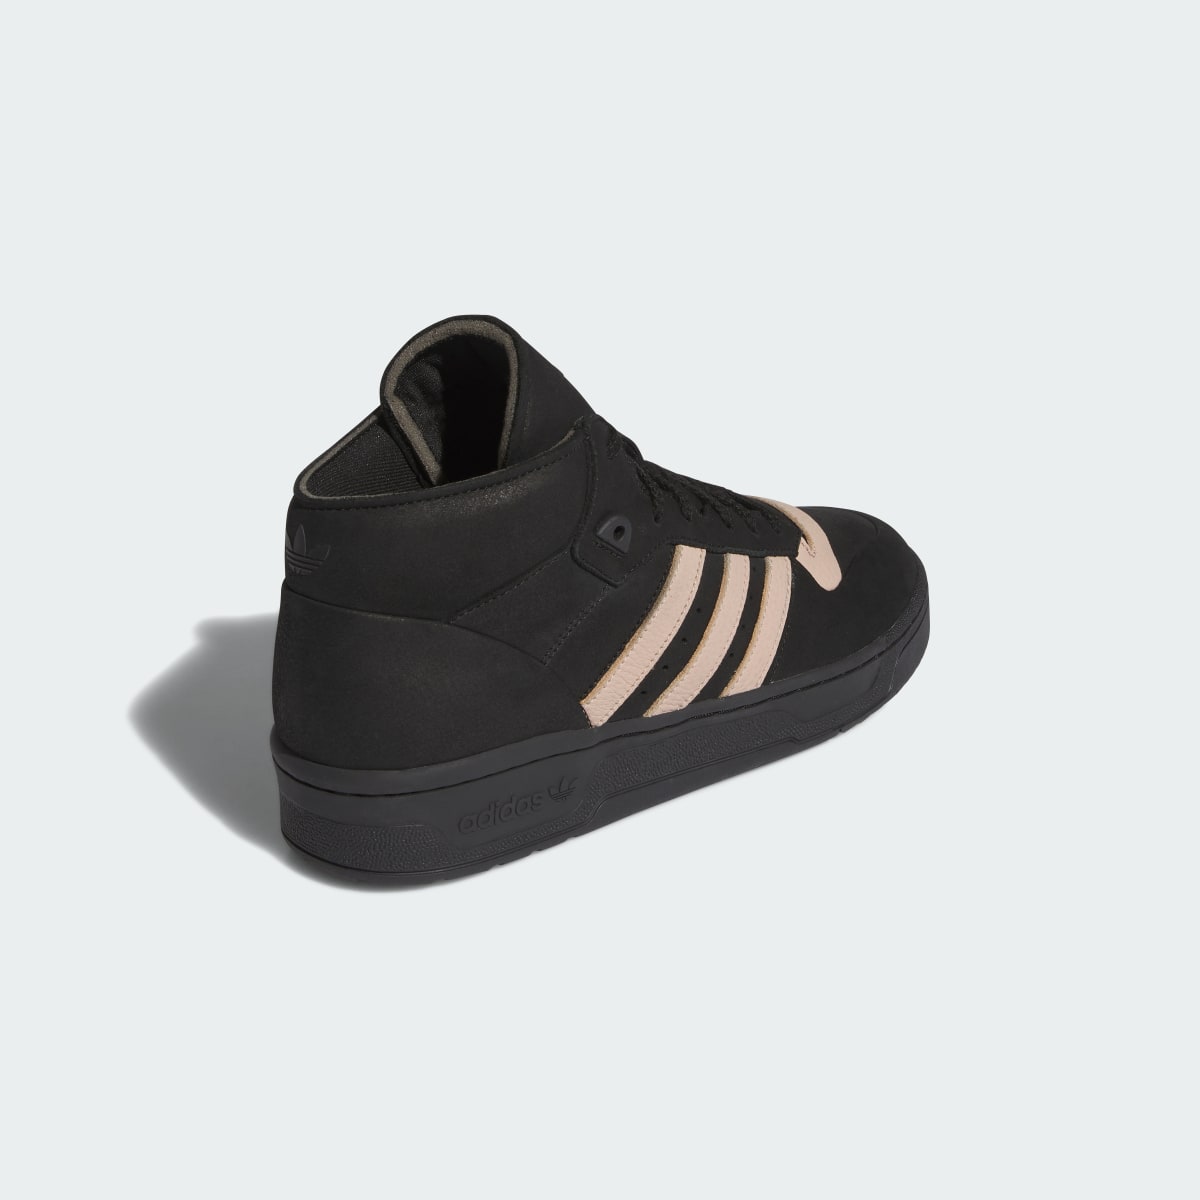 Adidas Rivalry Mid 001 Shoes. 6